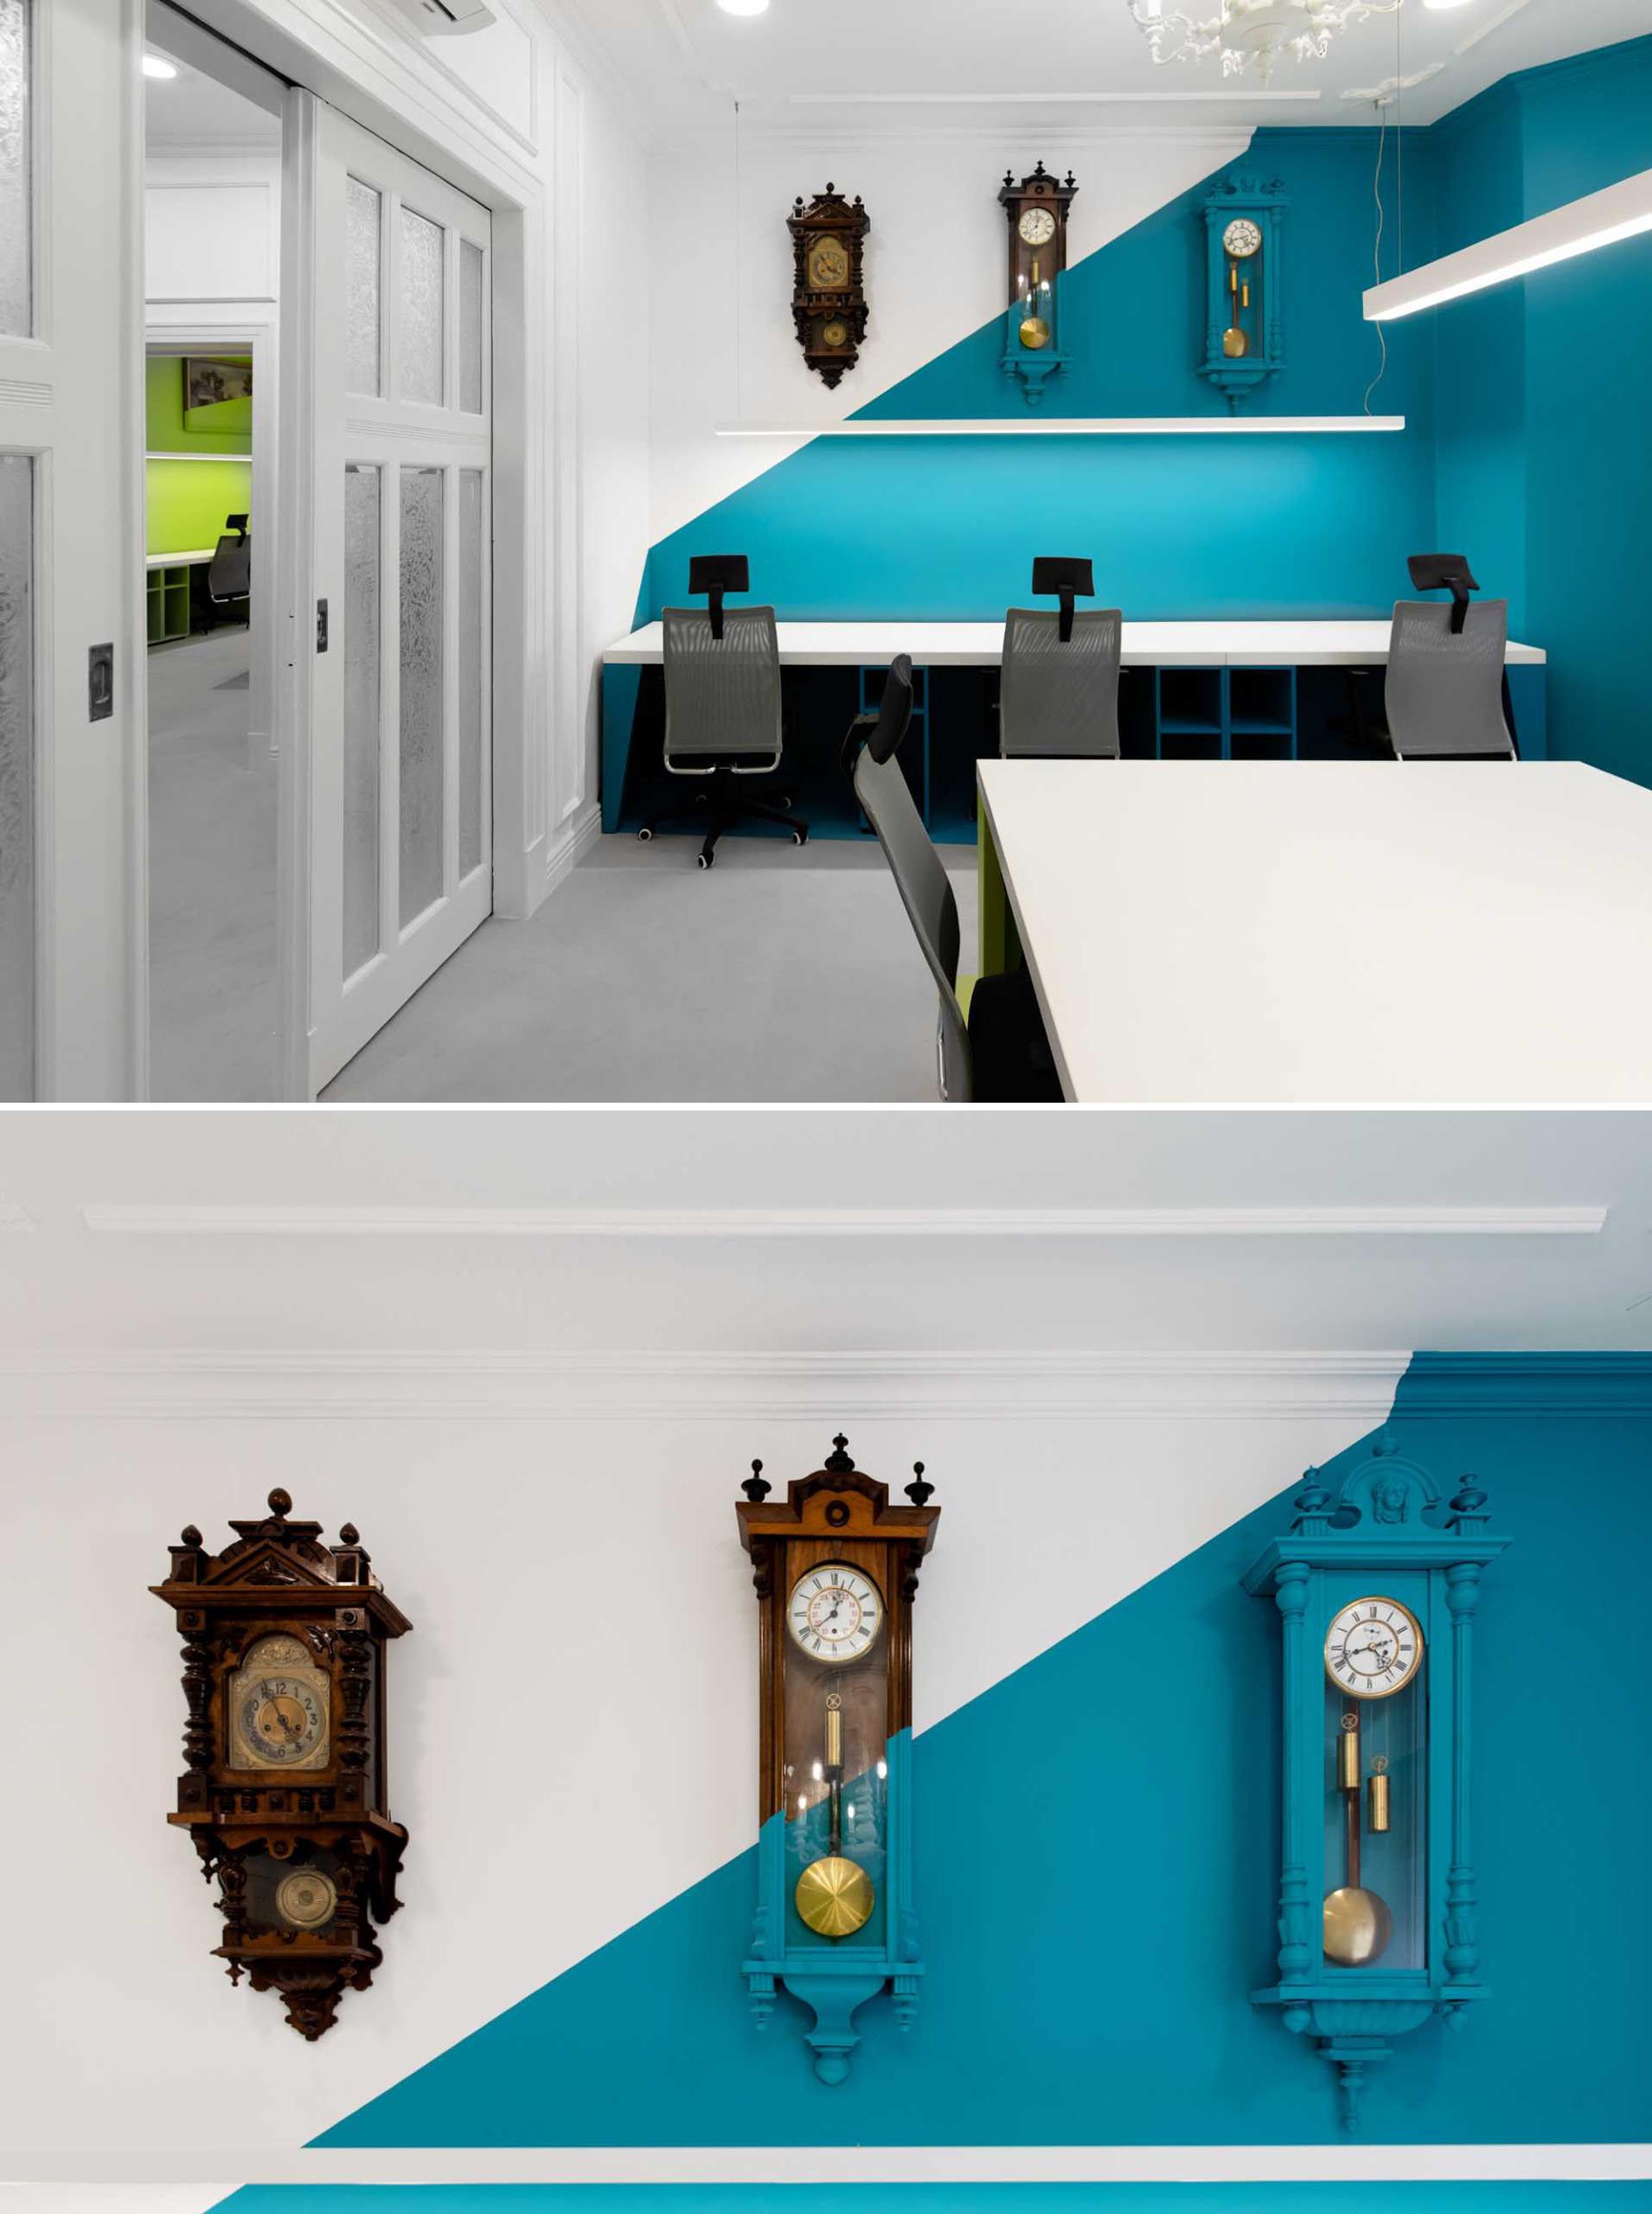 Turquoise abstract walls with matching painted decor create a unique look for this office interior.